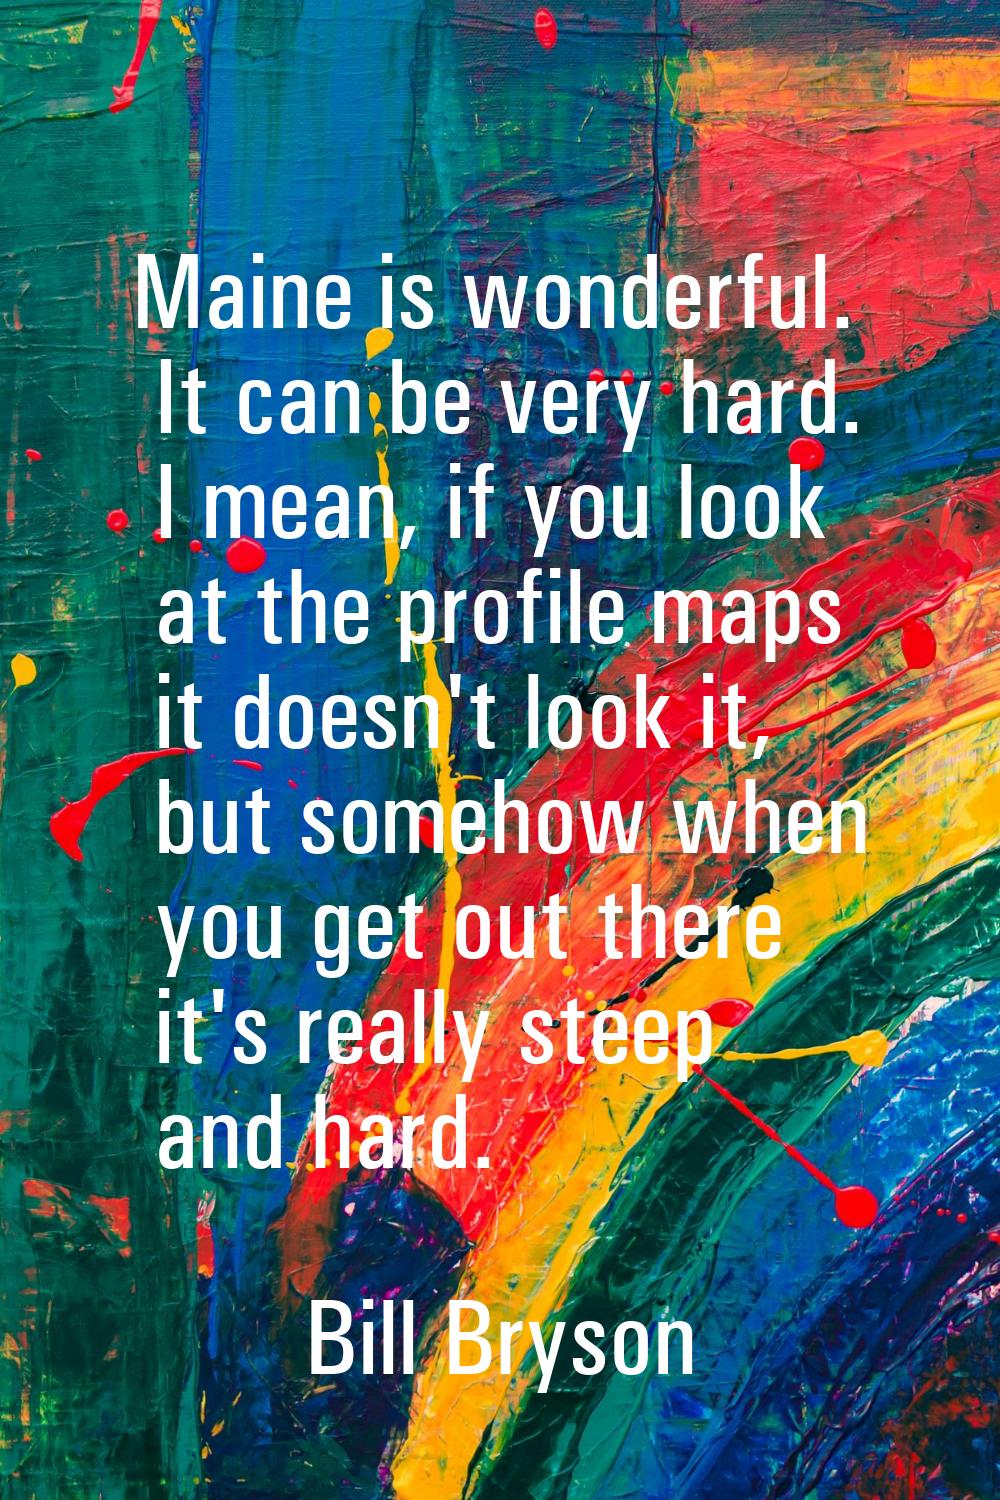 Maine is wonderful. It can be very hard. I mean, if you look at the profile maps it doesn't look it